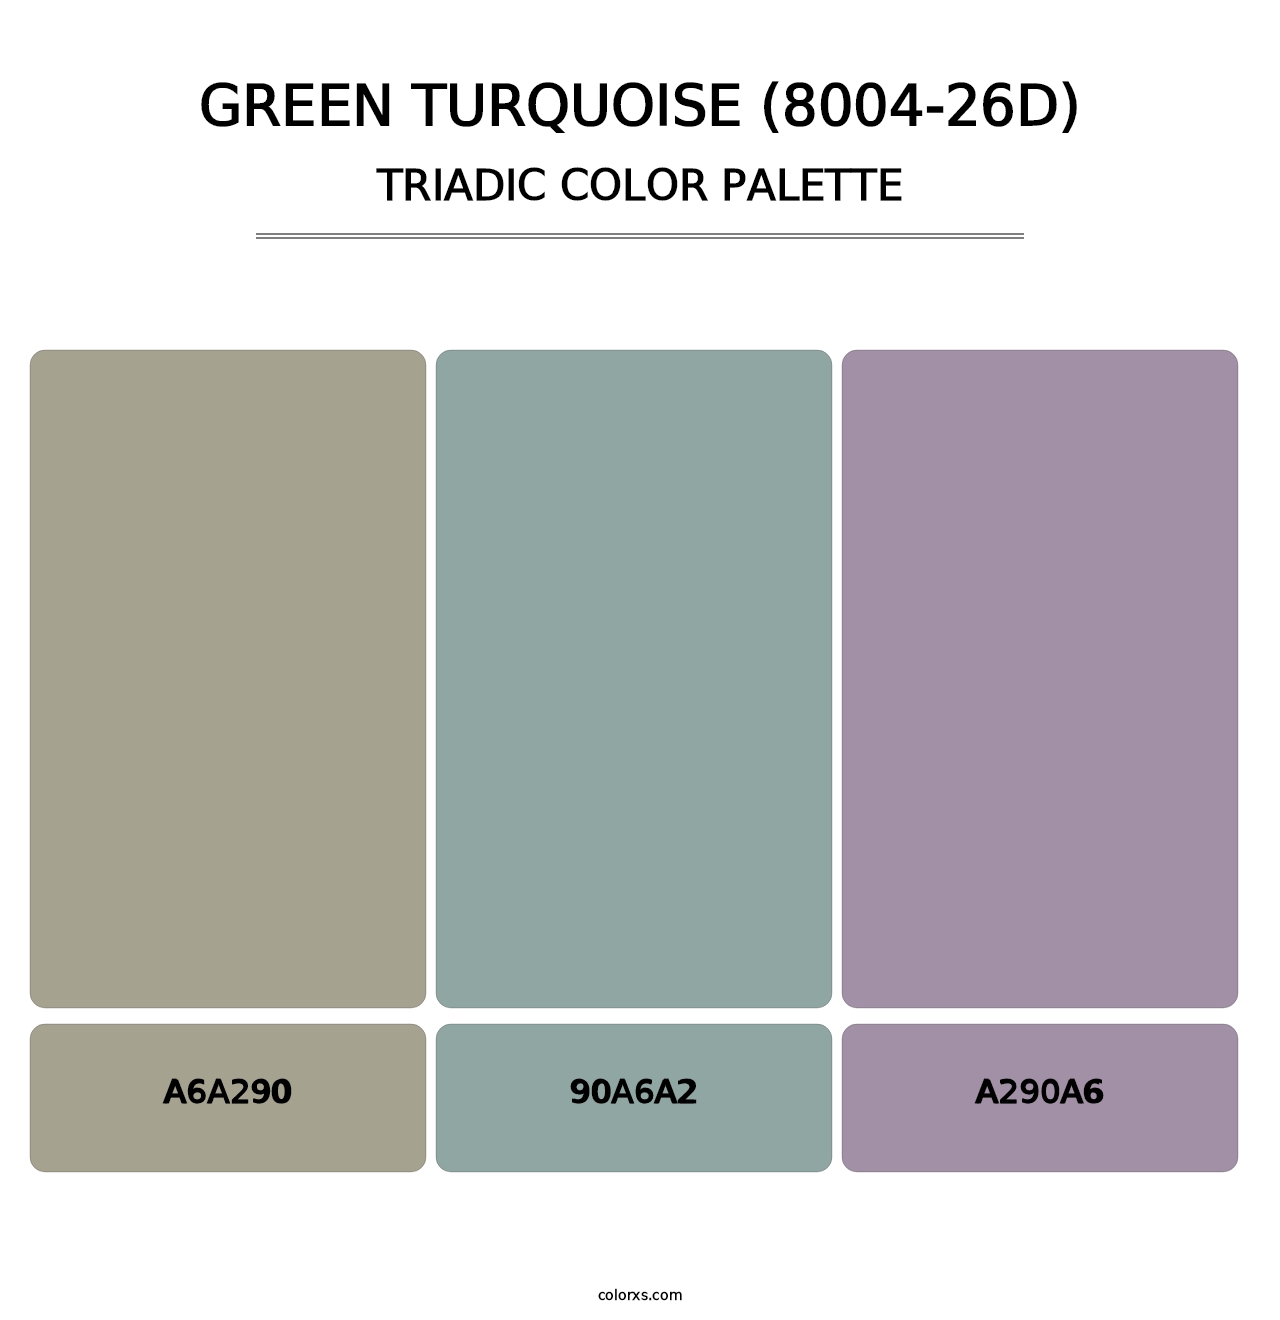 Green Turquoise (8004-26D) - Triadic Color Palette